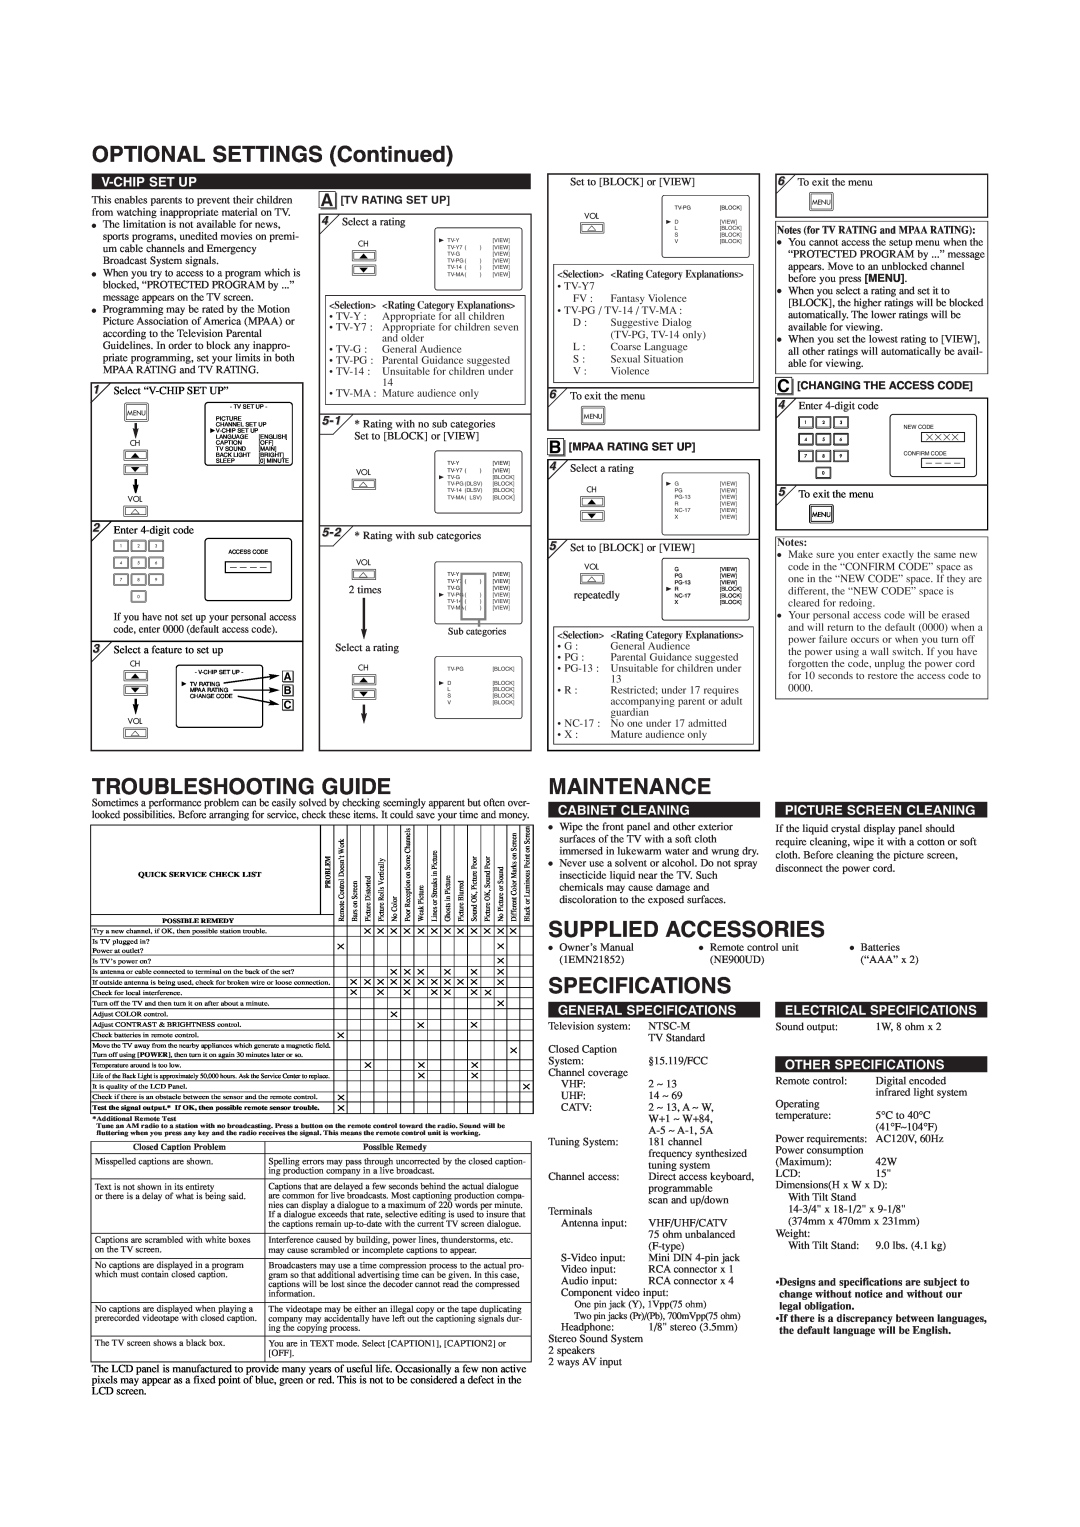 Sylvania 6615LG OPTIONAL SETTINGS Continued, Troubleshooting Guide, Maintenance, Supplied Accessories, Specifications 